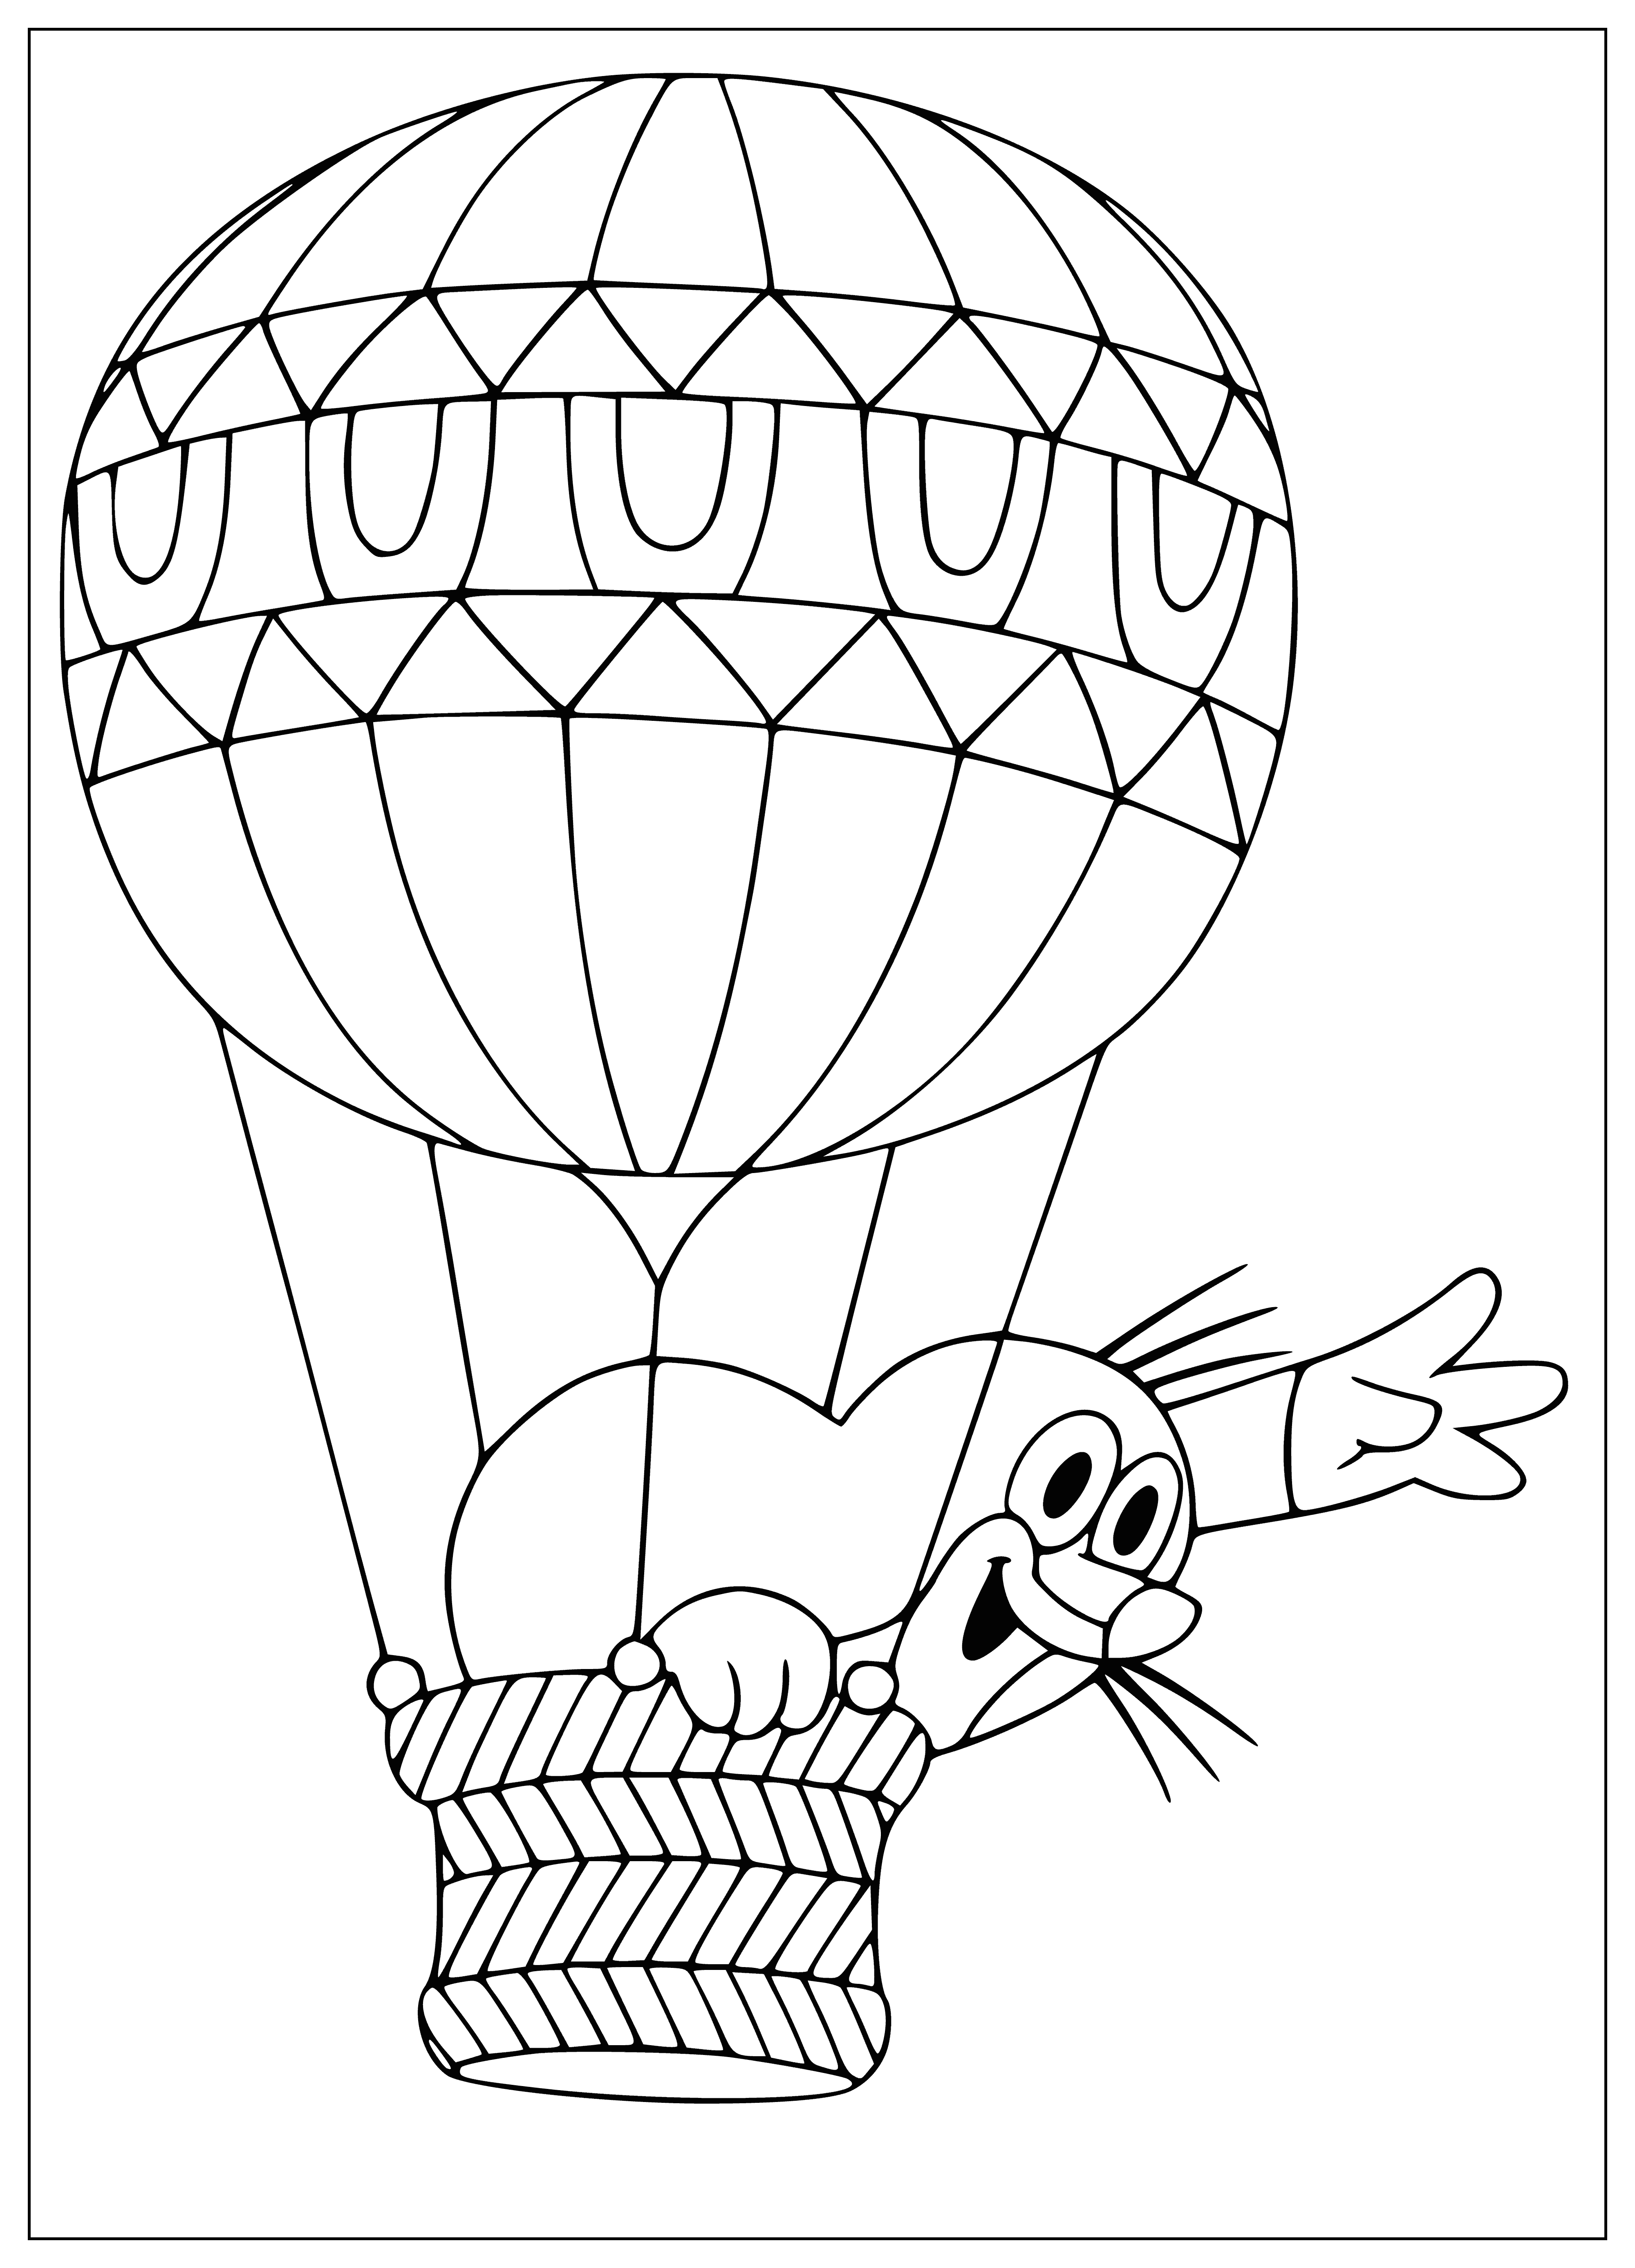 coloring page: Krtek, a small mole in overalls, happily rolls a ball in the meadow.